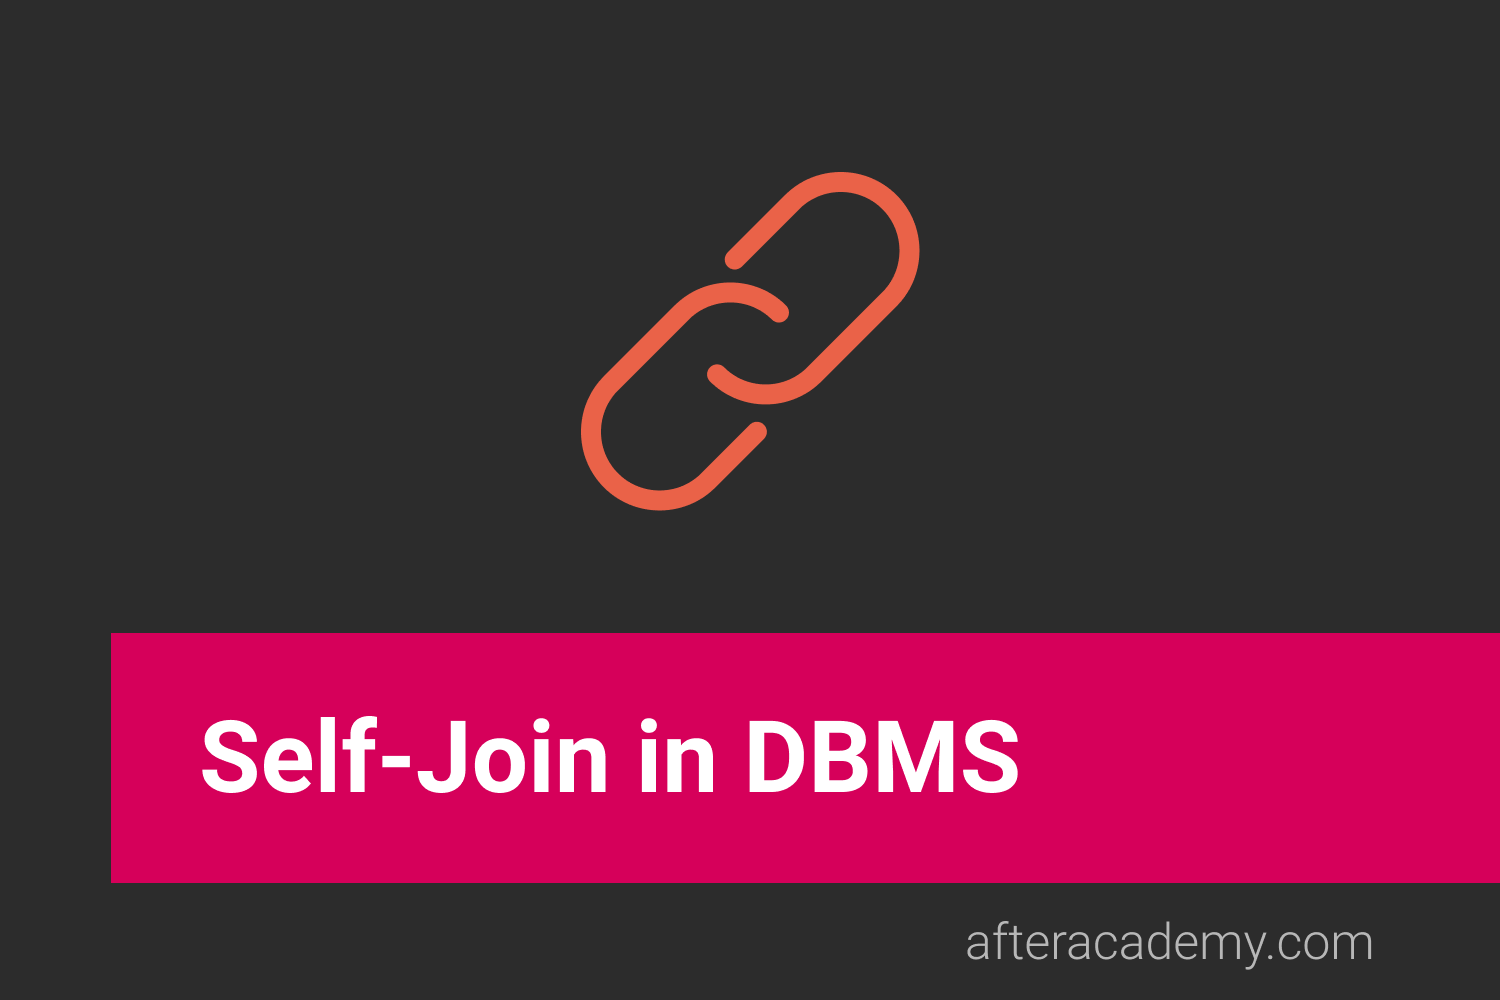 What is Self-Join in DBMS?